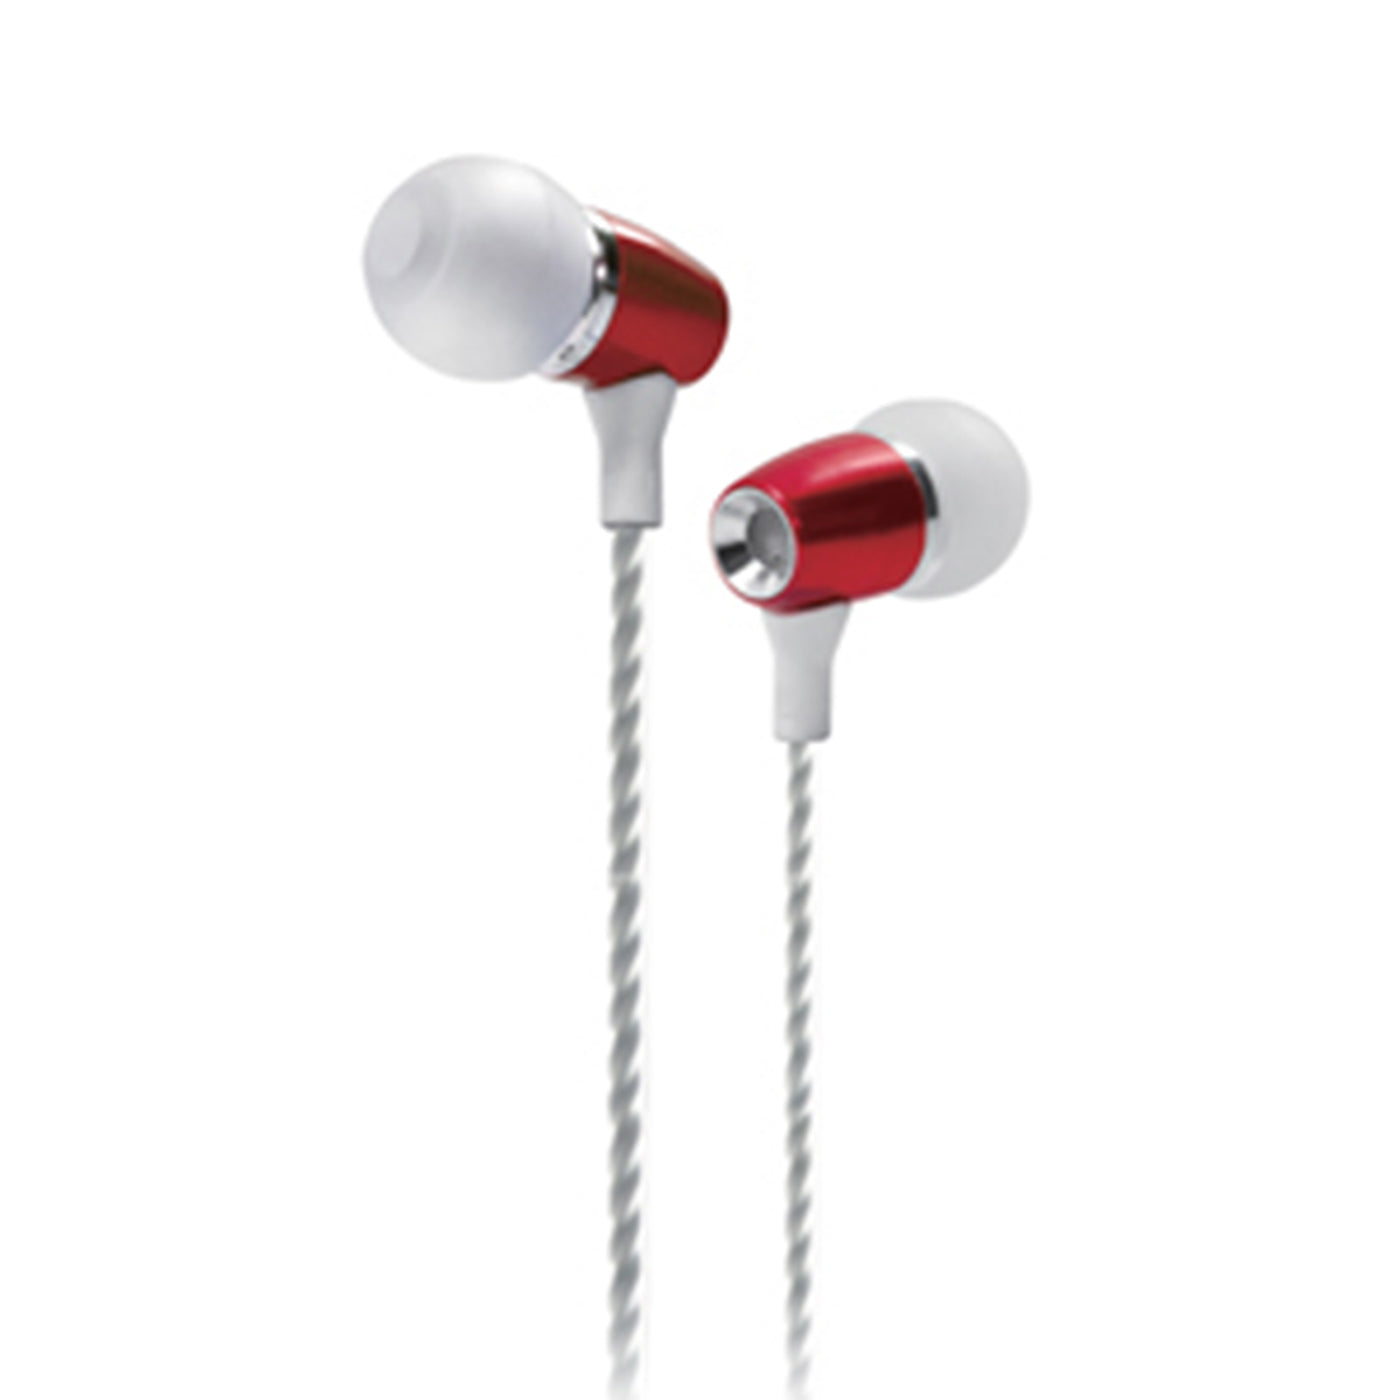 Headphones Headsets Earbuds Wired In-Ear Bass H350 With Microphone Stereo Red Color